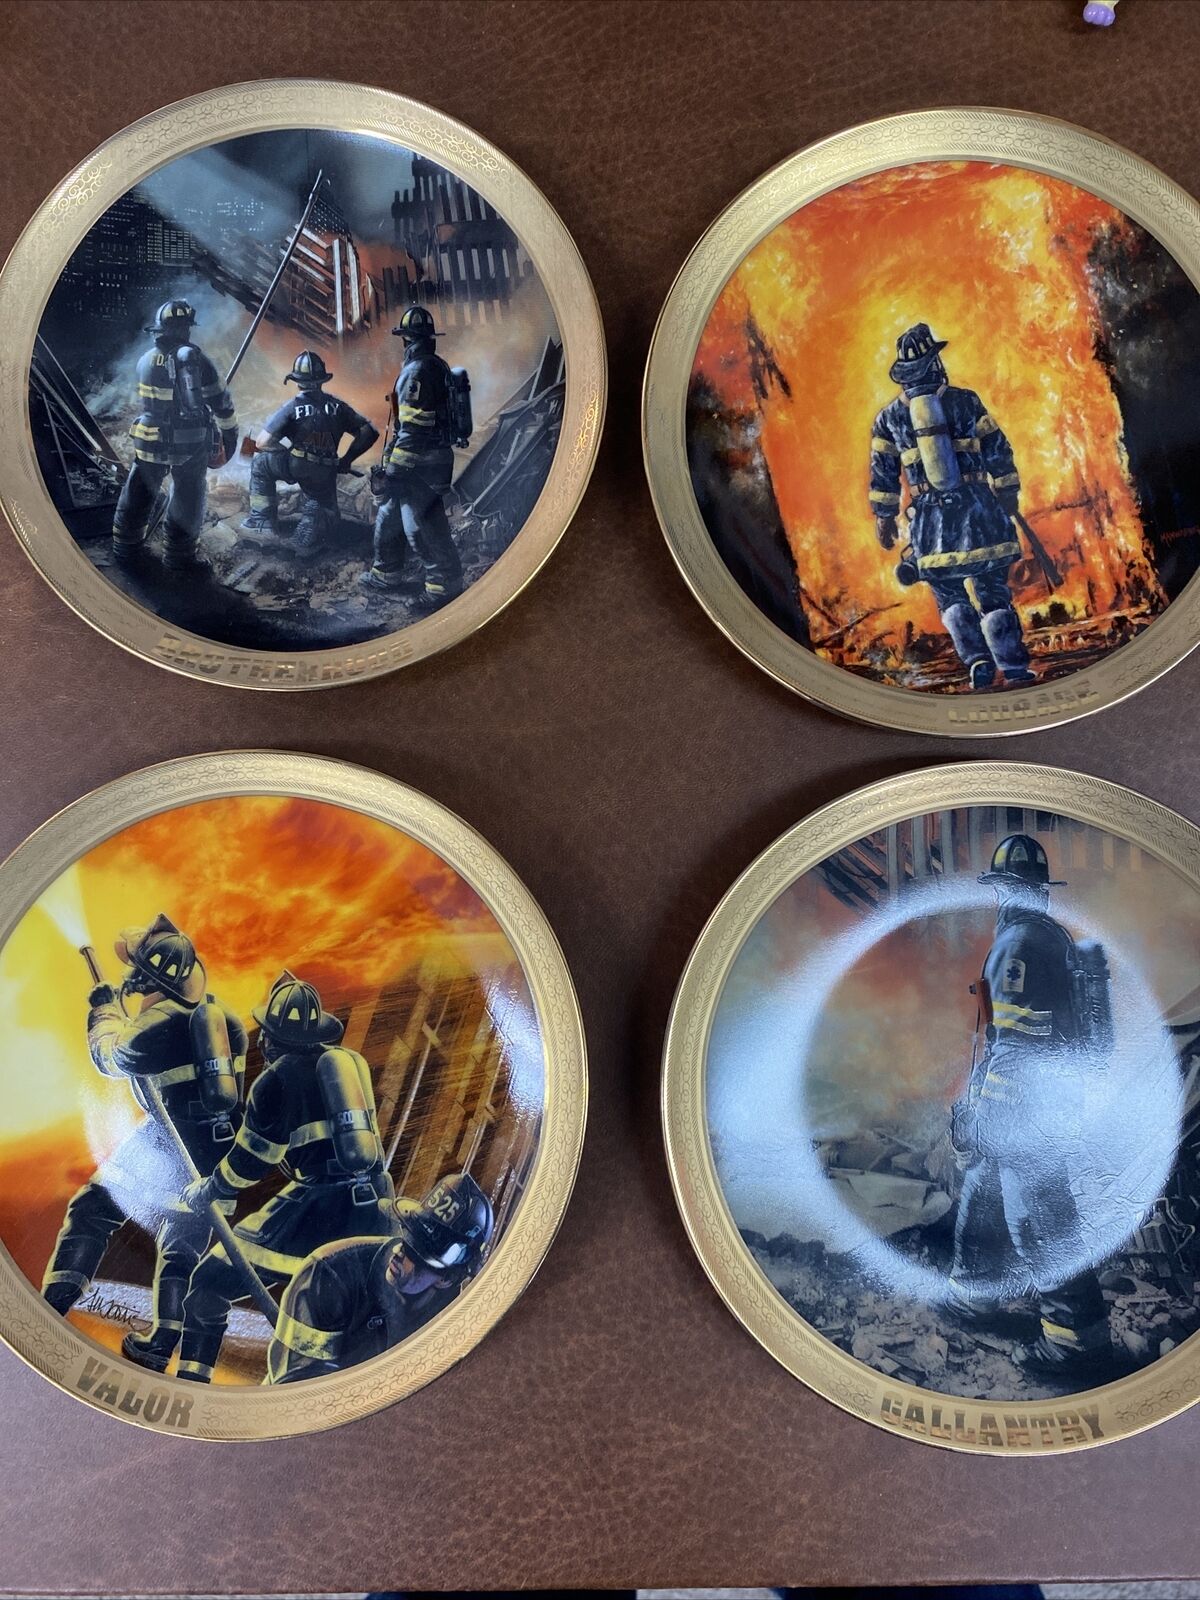 Lot of 6 Branford Exchange visions of valor mark Manwaring Fire Rescue plates